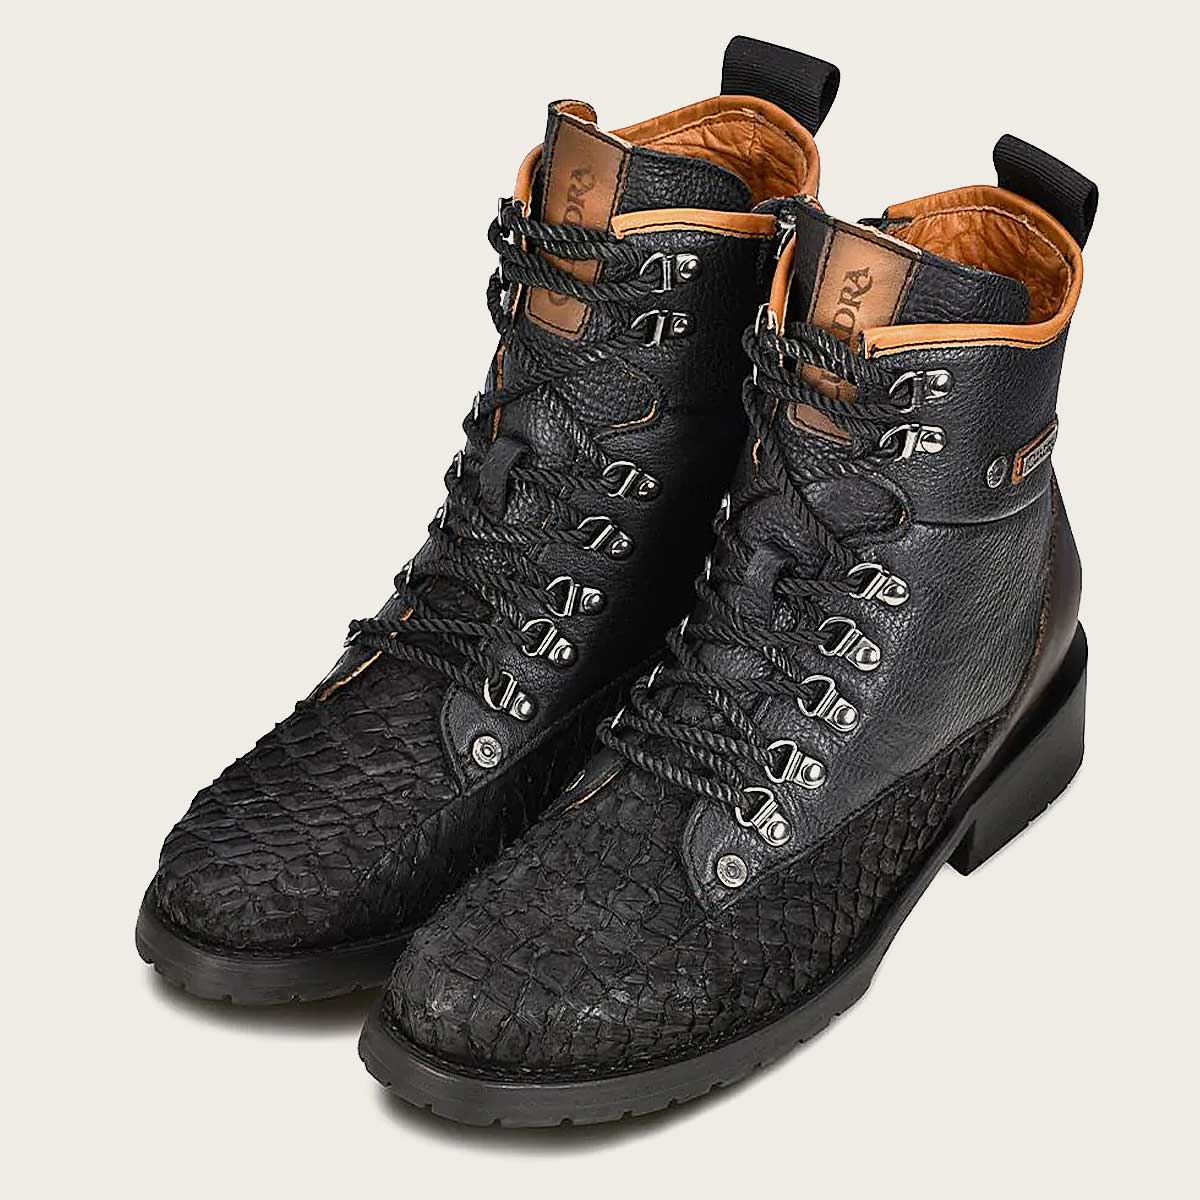 Stylish black poisson leather ankle boots for men, inspired by mining style with metallic accents.